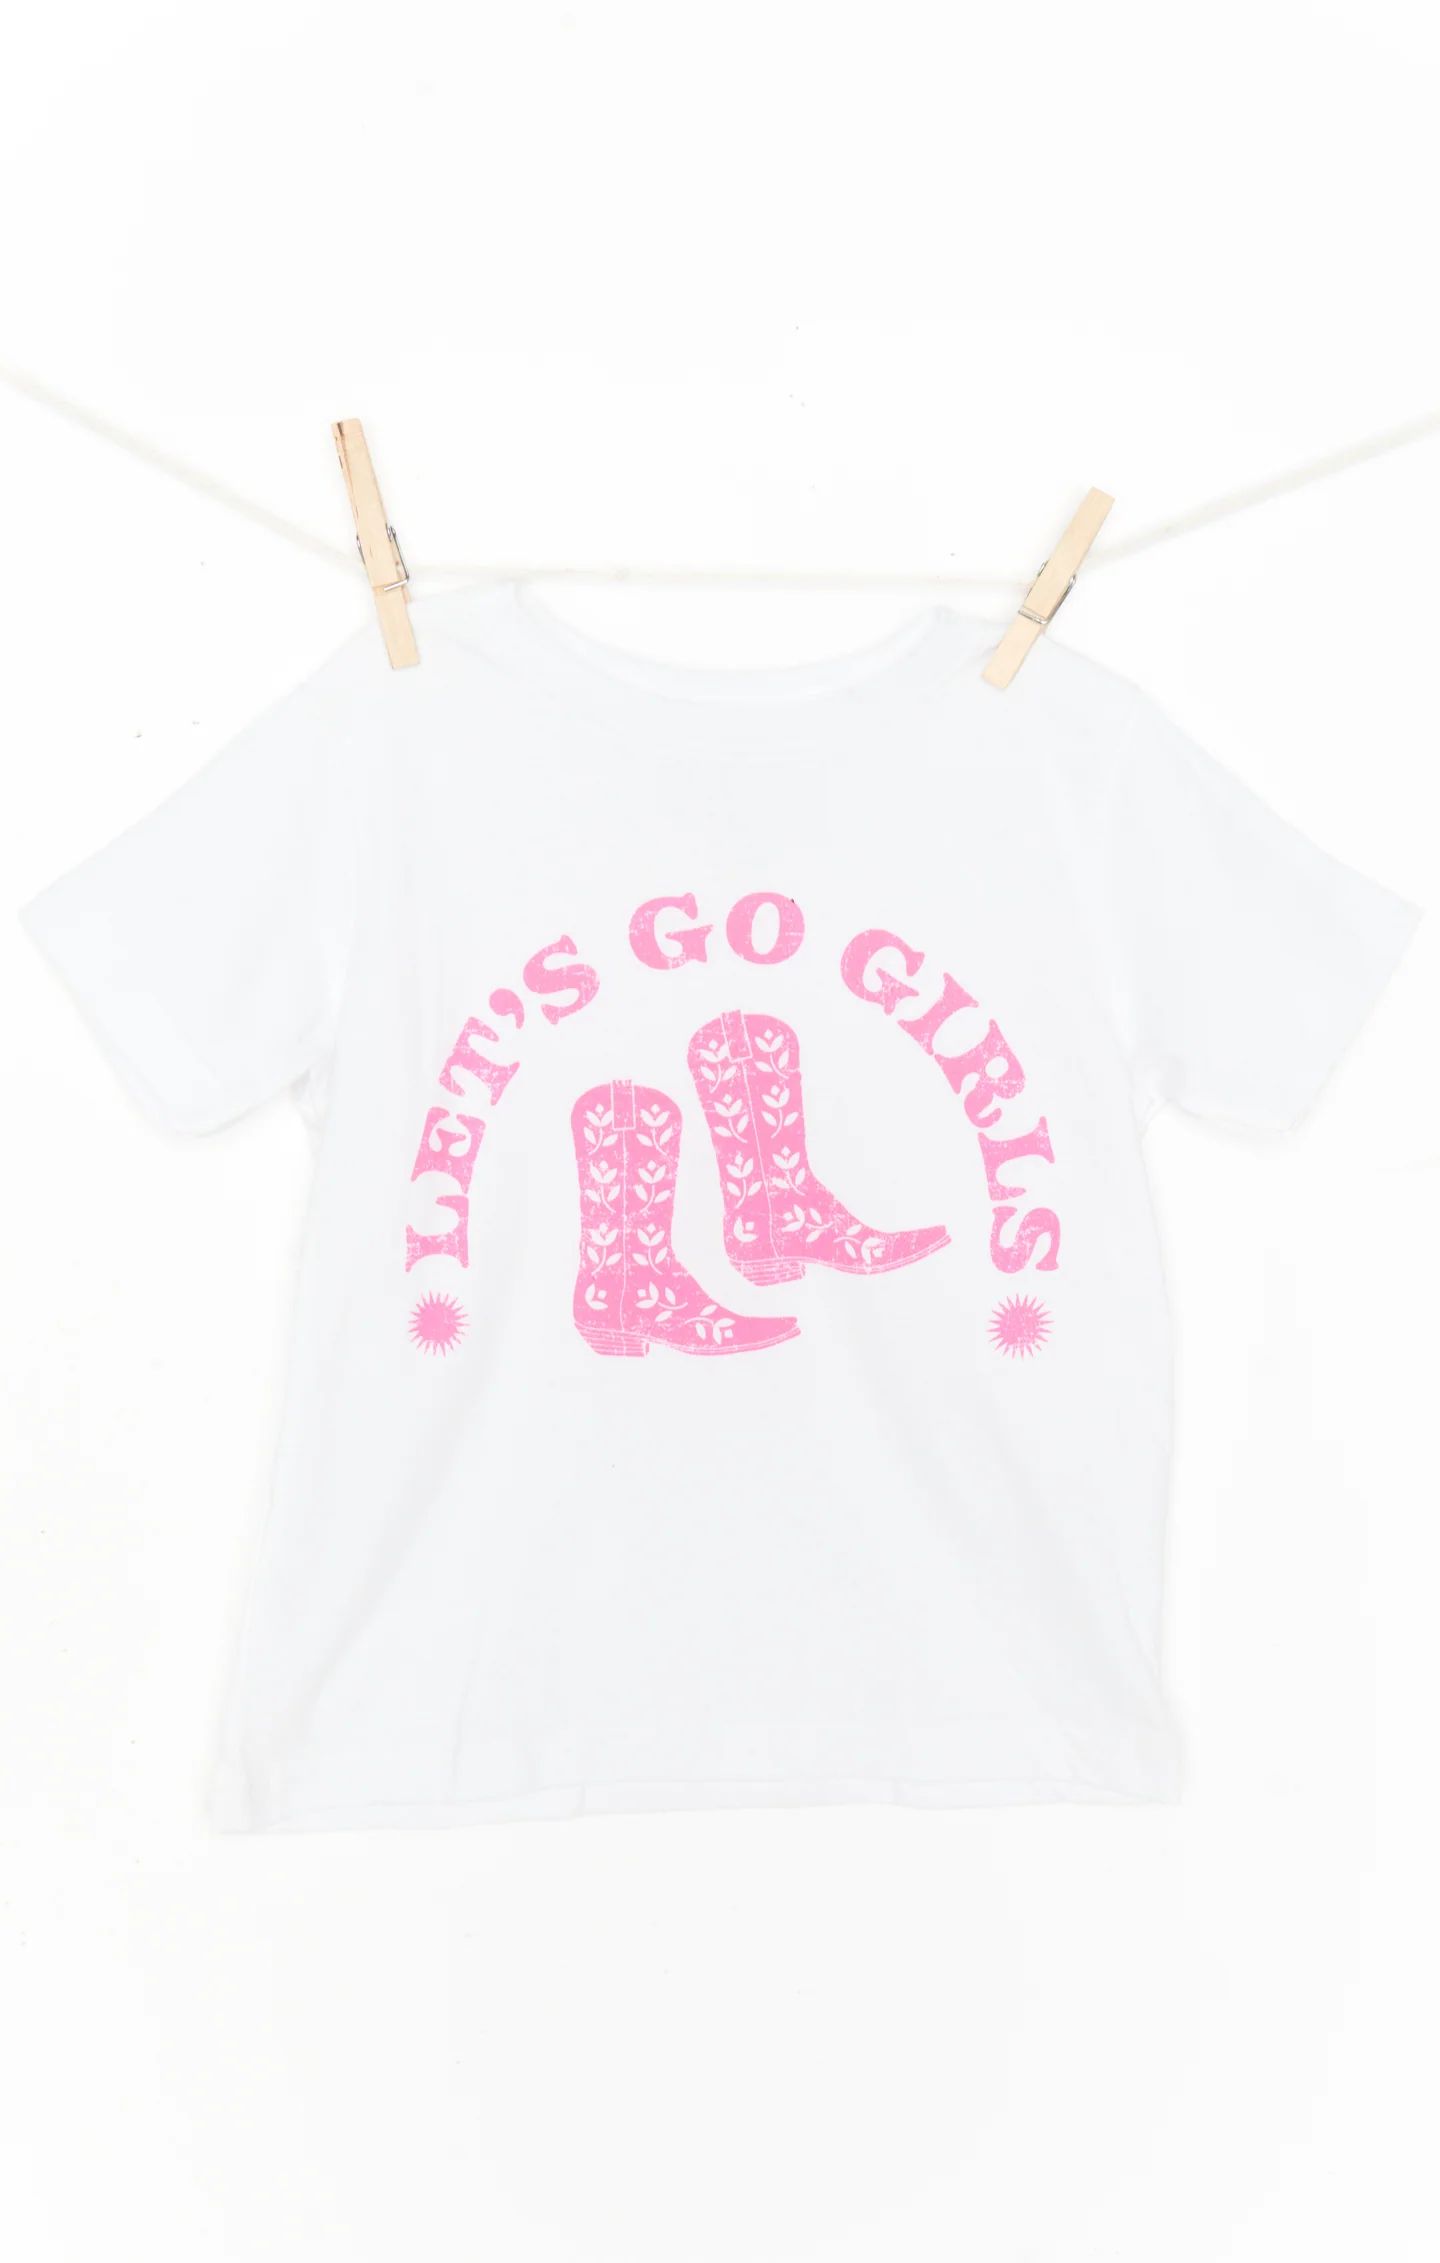 Wolfie Tee ~ Lets Go Girls Graphic | Show Me Your Mumu